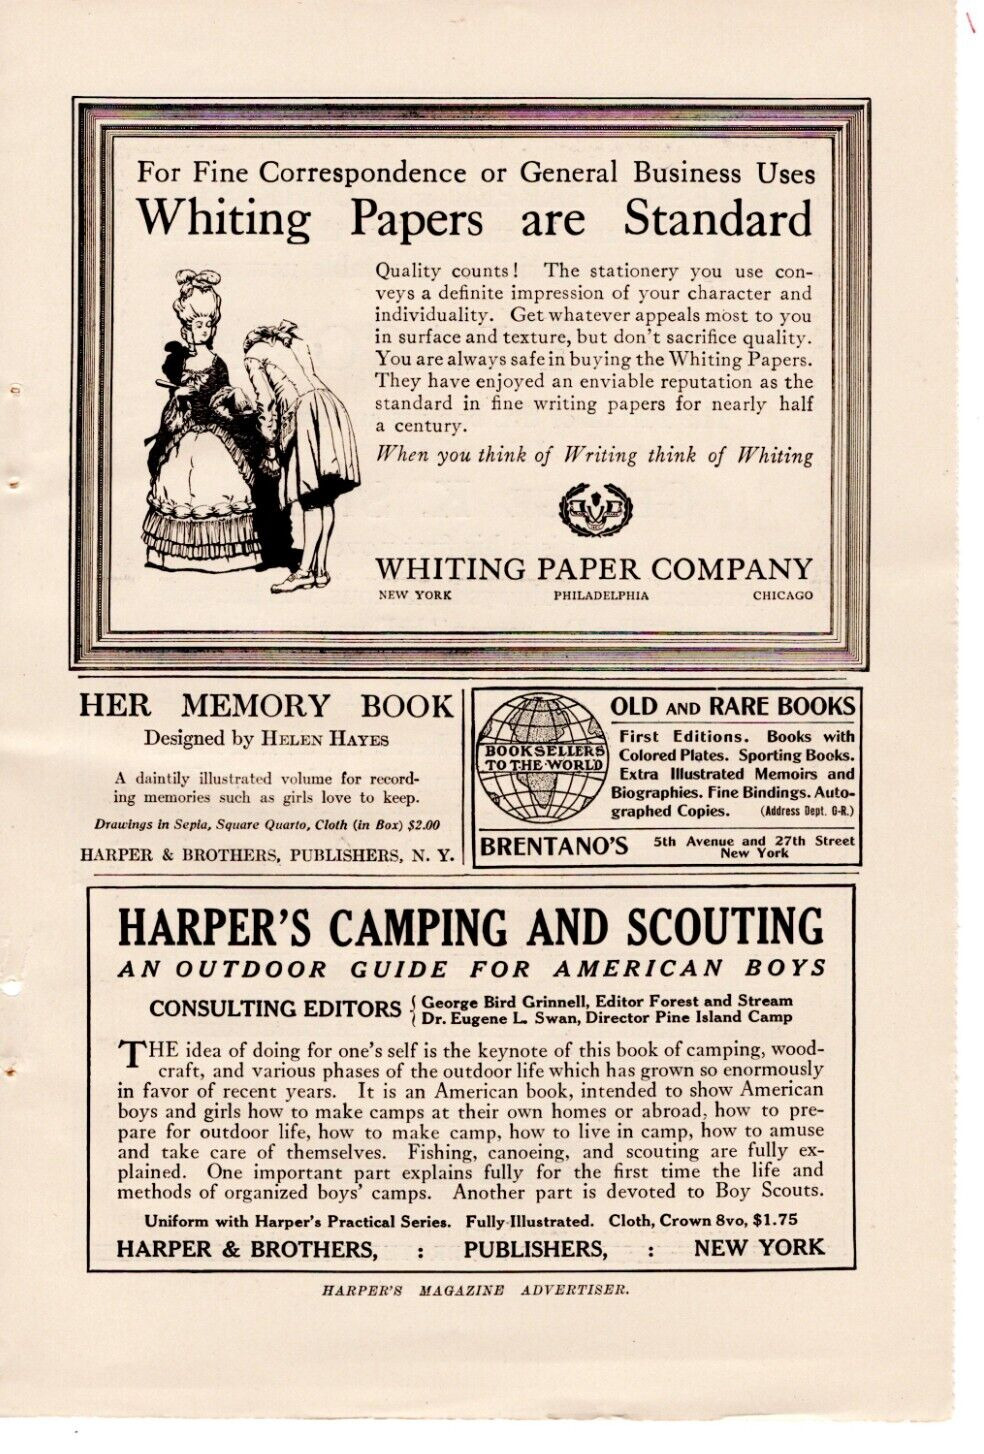 ANTIQUE Print AD Camping Guide Whiting Paper Co Brentano\'s BOOKS HARPER\'S 1913